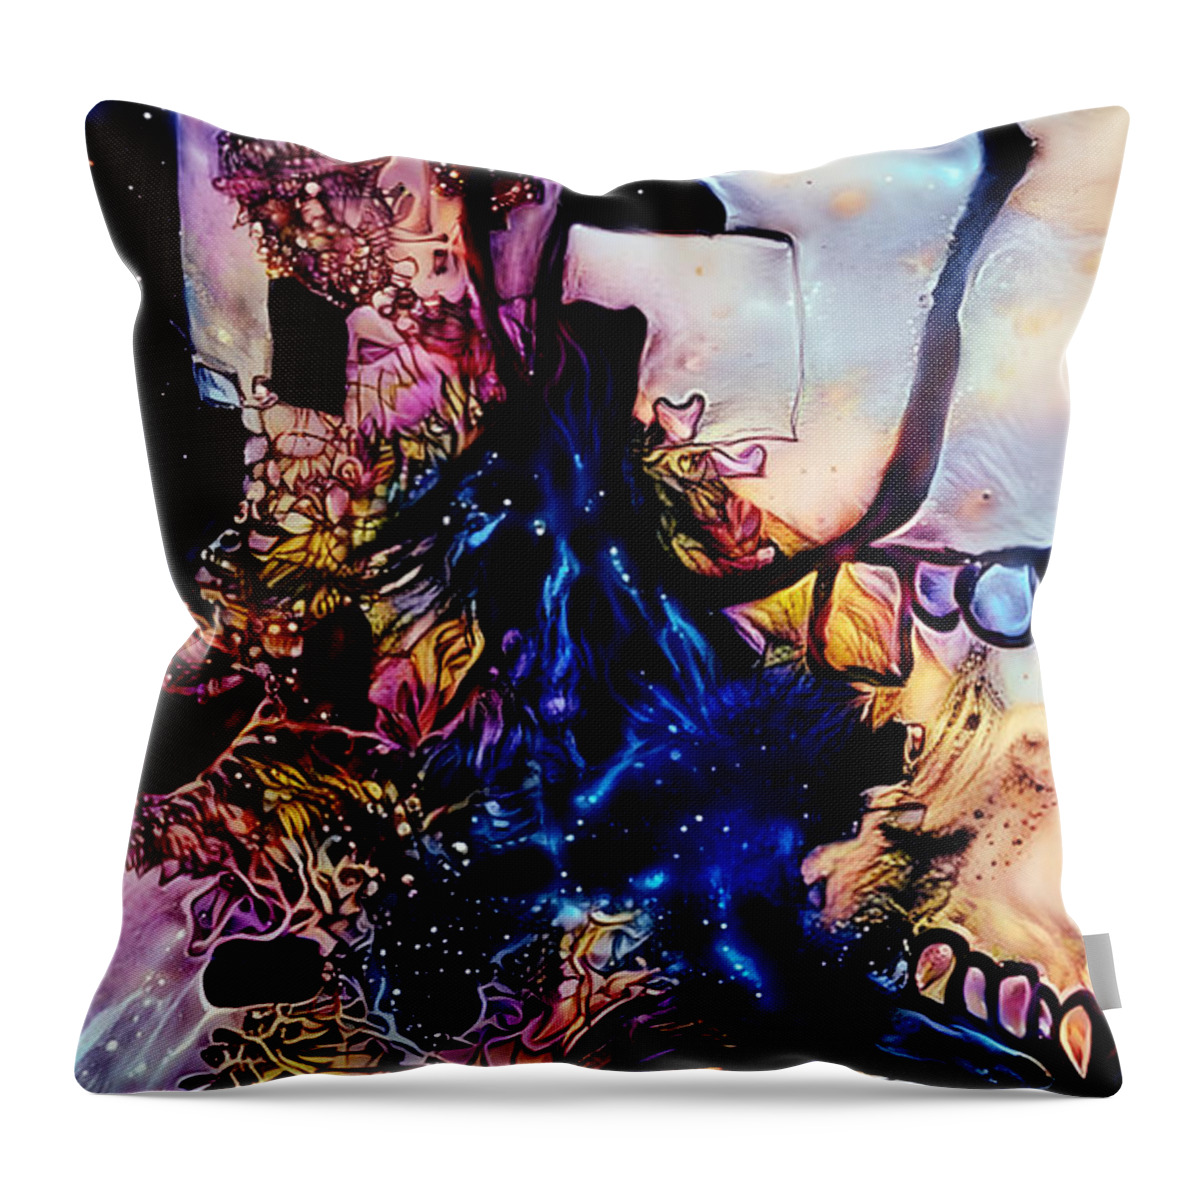 Contemporary Art Throw Pillow featuring the digital art 1 by Jeremiah Ray